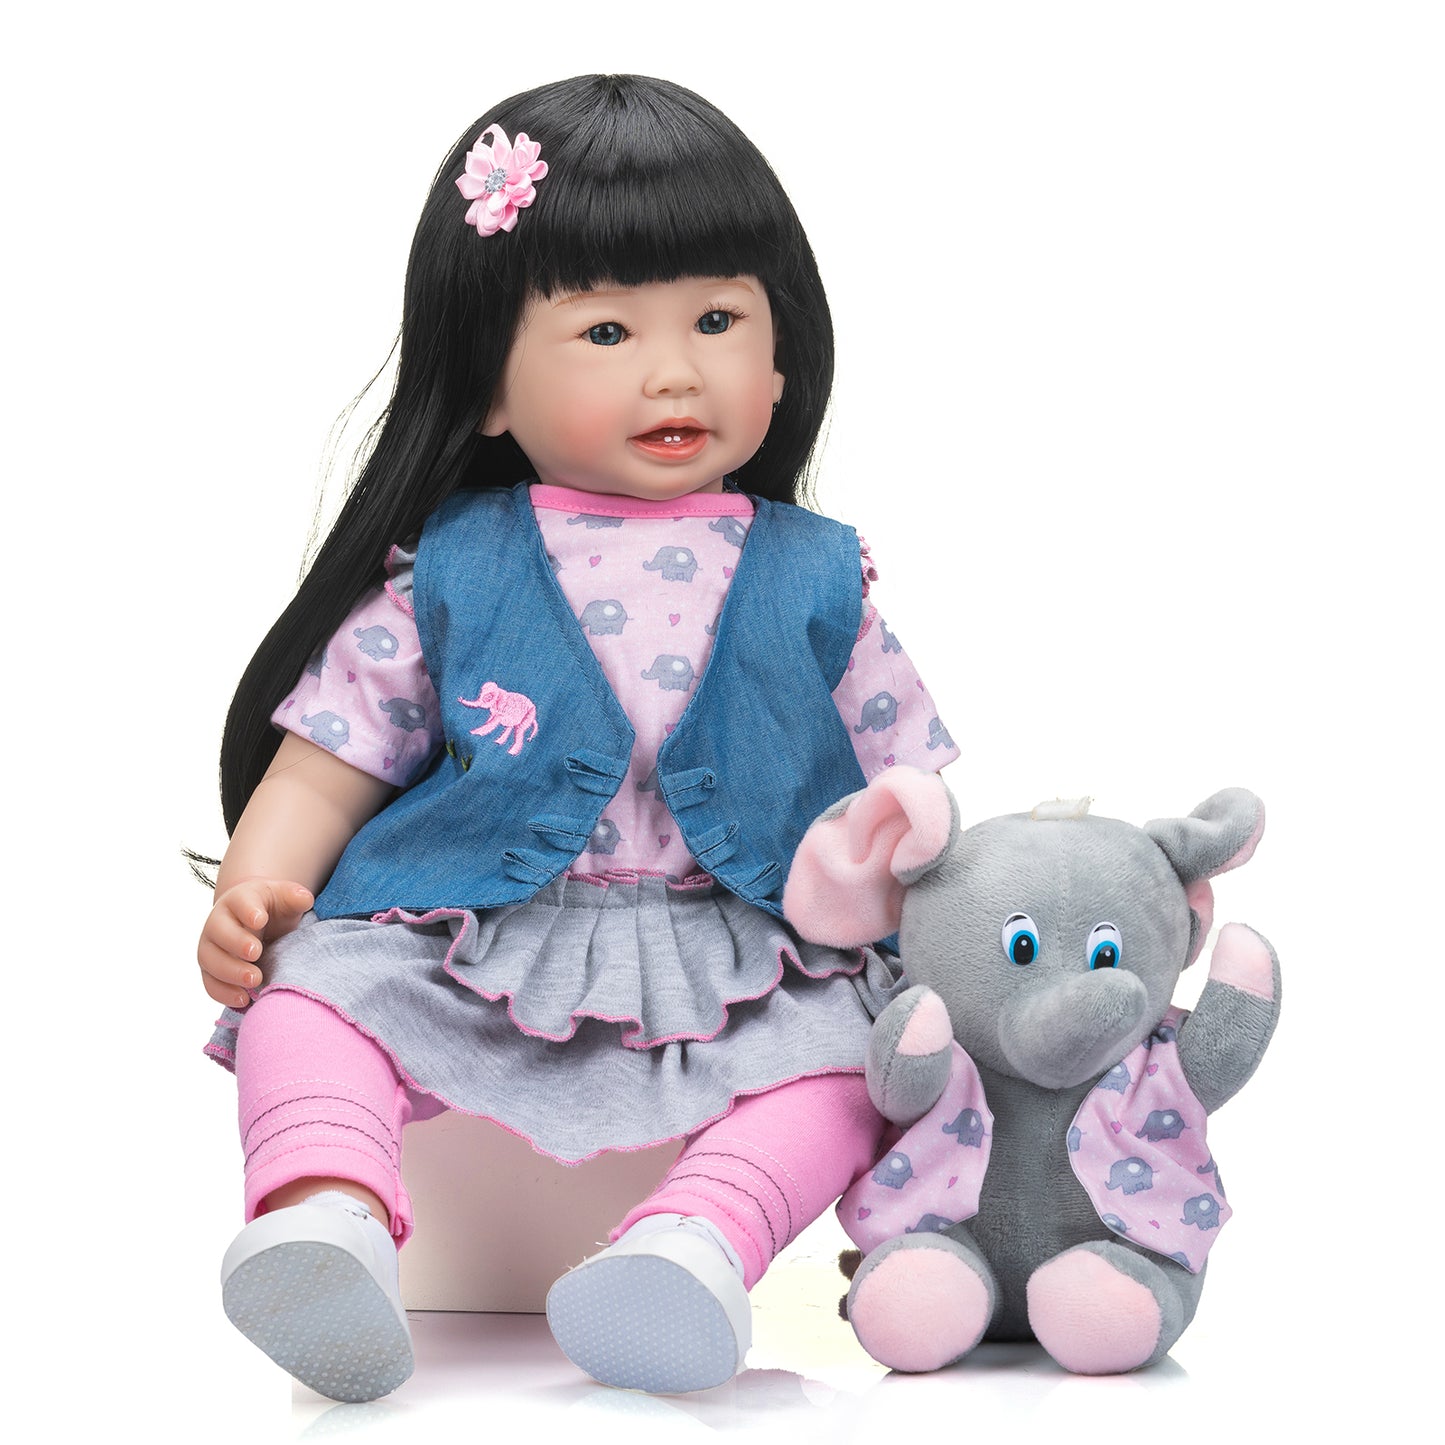 Lifelike Silicone Reborn Toddler Princess Girls Dolls with Long Hair 24 Inch 60CM Weighted Soft Cloth Body Realistic Baby Dolls That Ook Real Life Baby Dolls Toys Gift For 3+ Year Old Girls